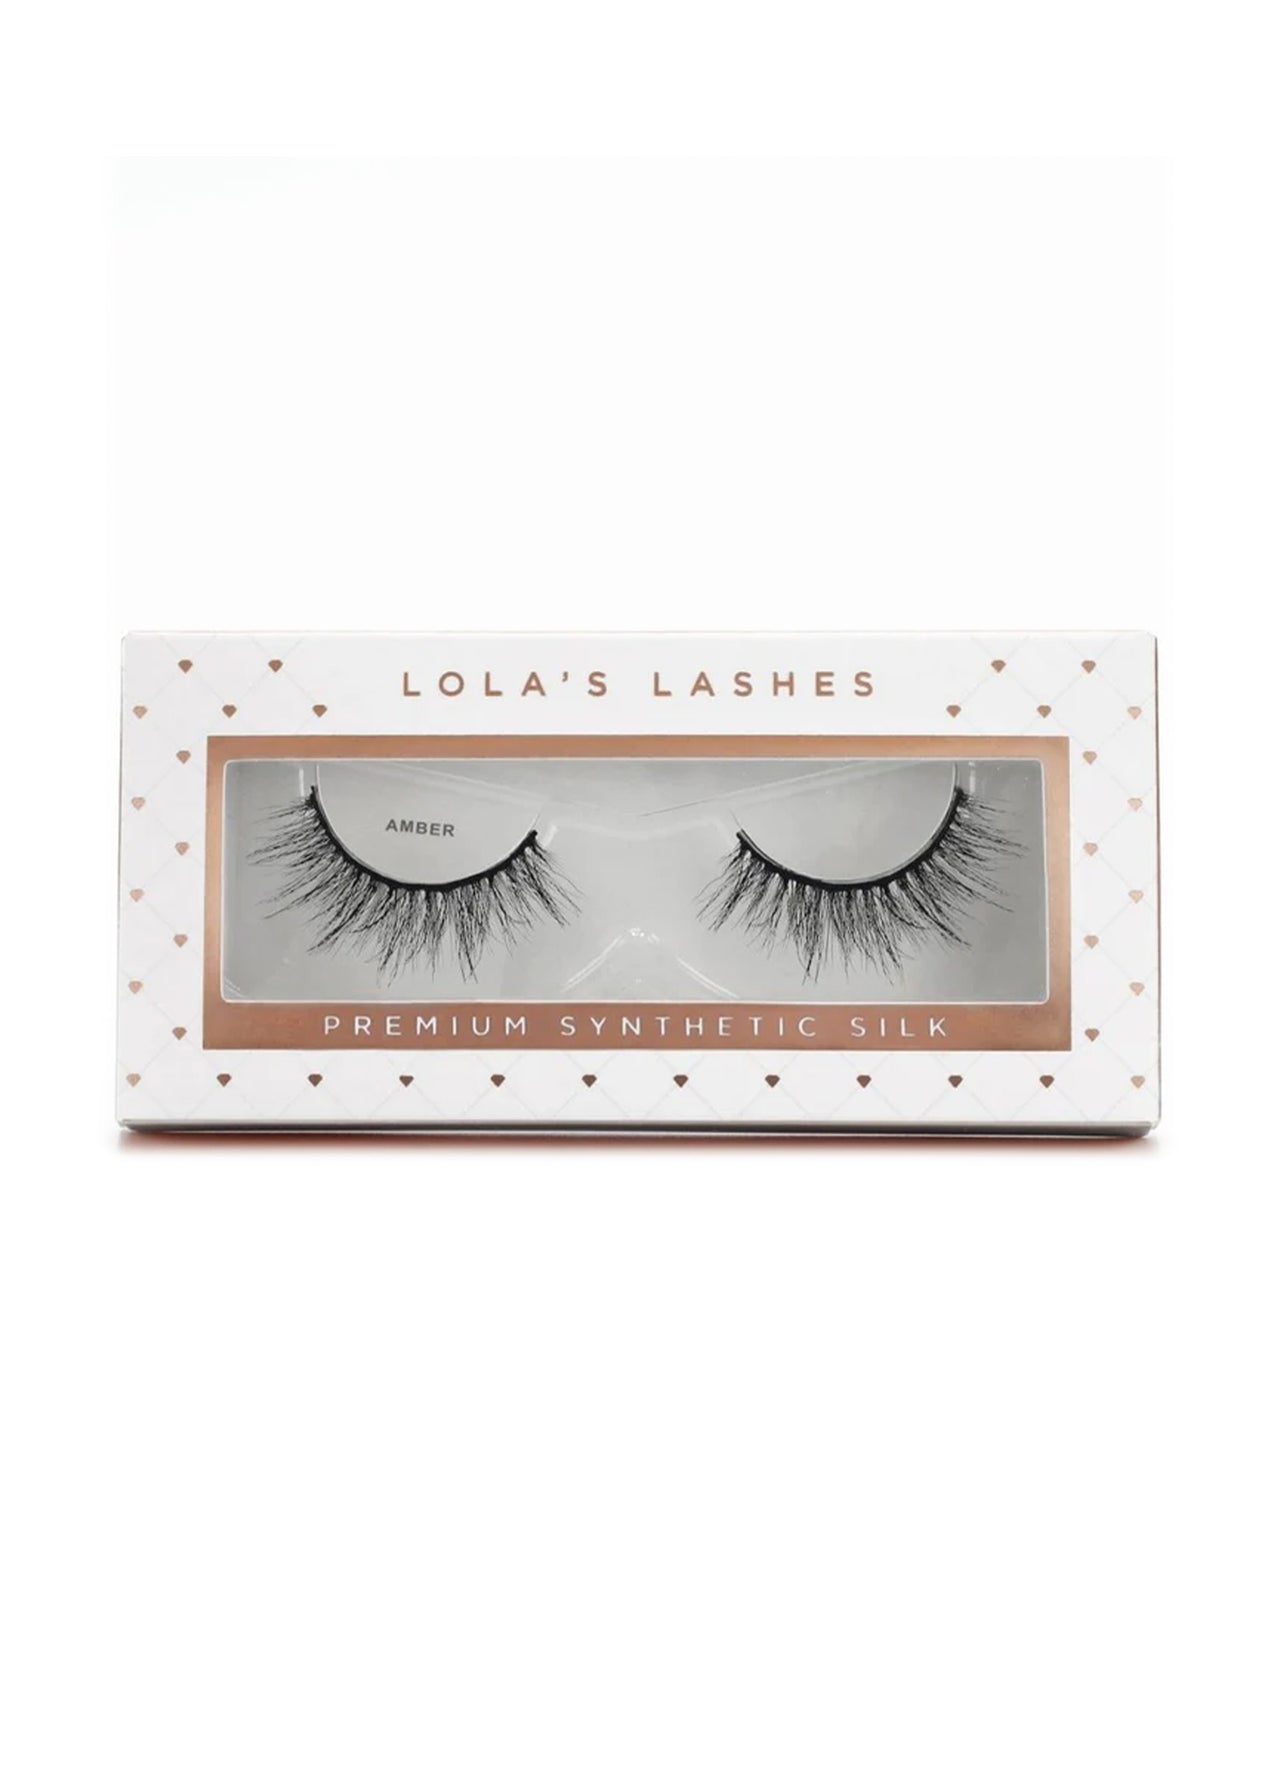 LOLA'S LASHES Synthetic Silk Amber Strip Lashes